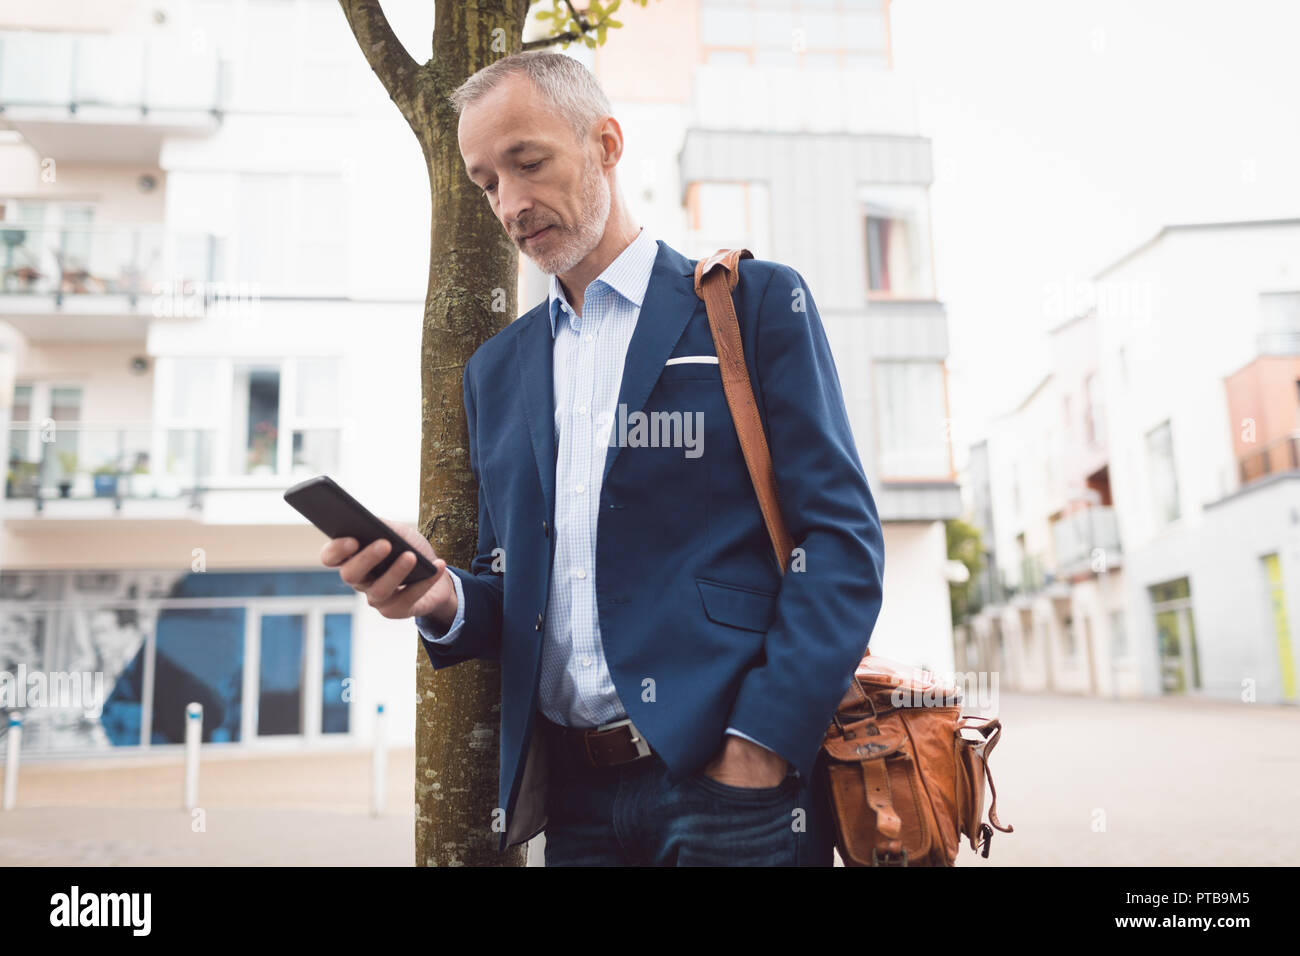 Businessman using mobile phone in city Stock Photo